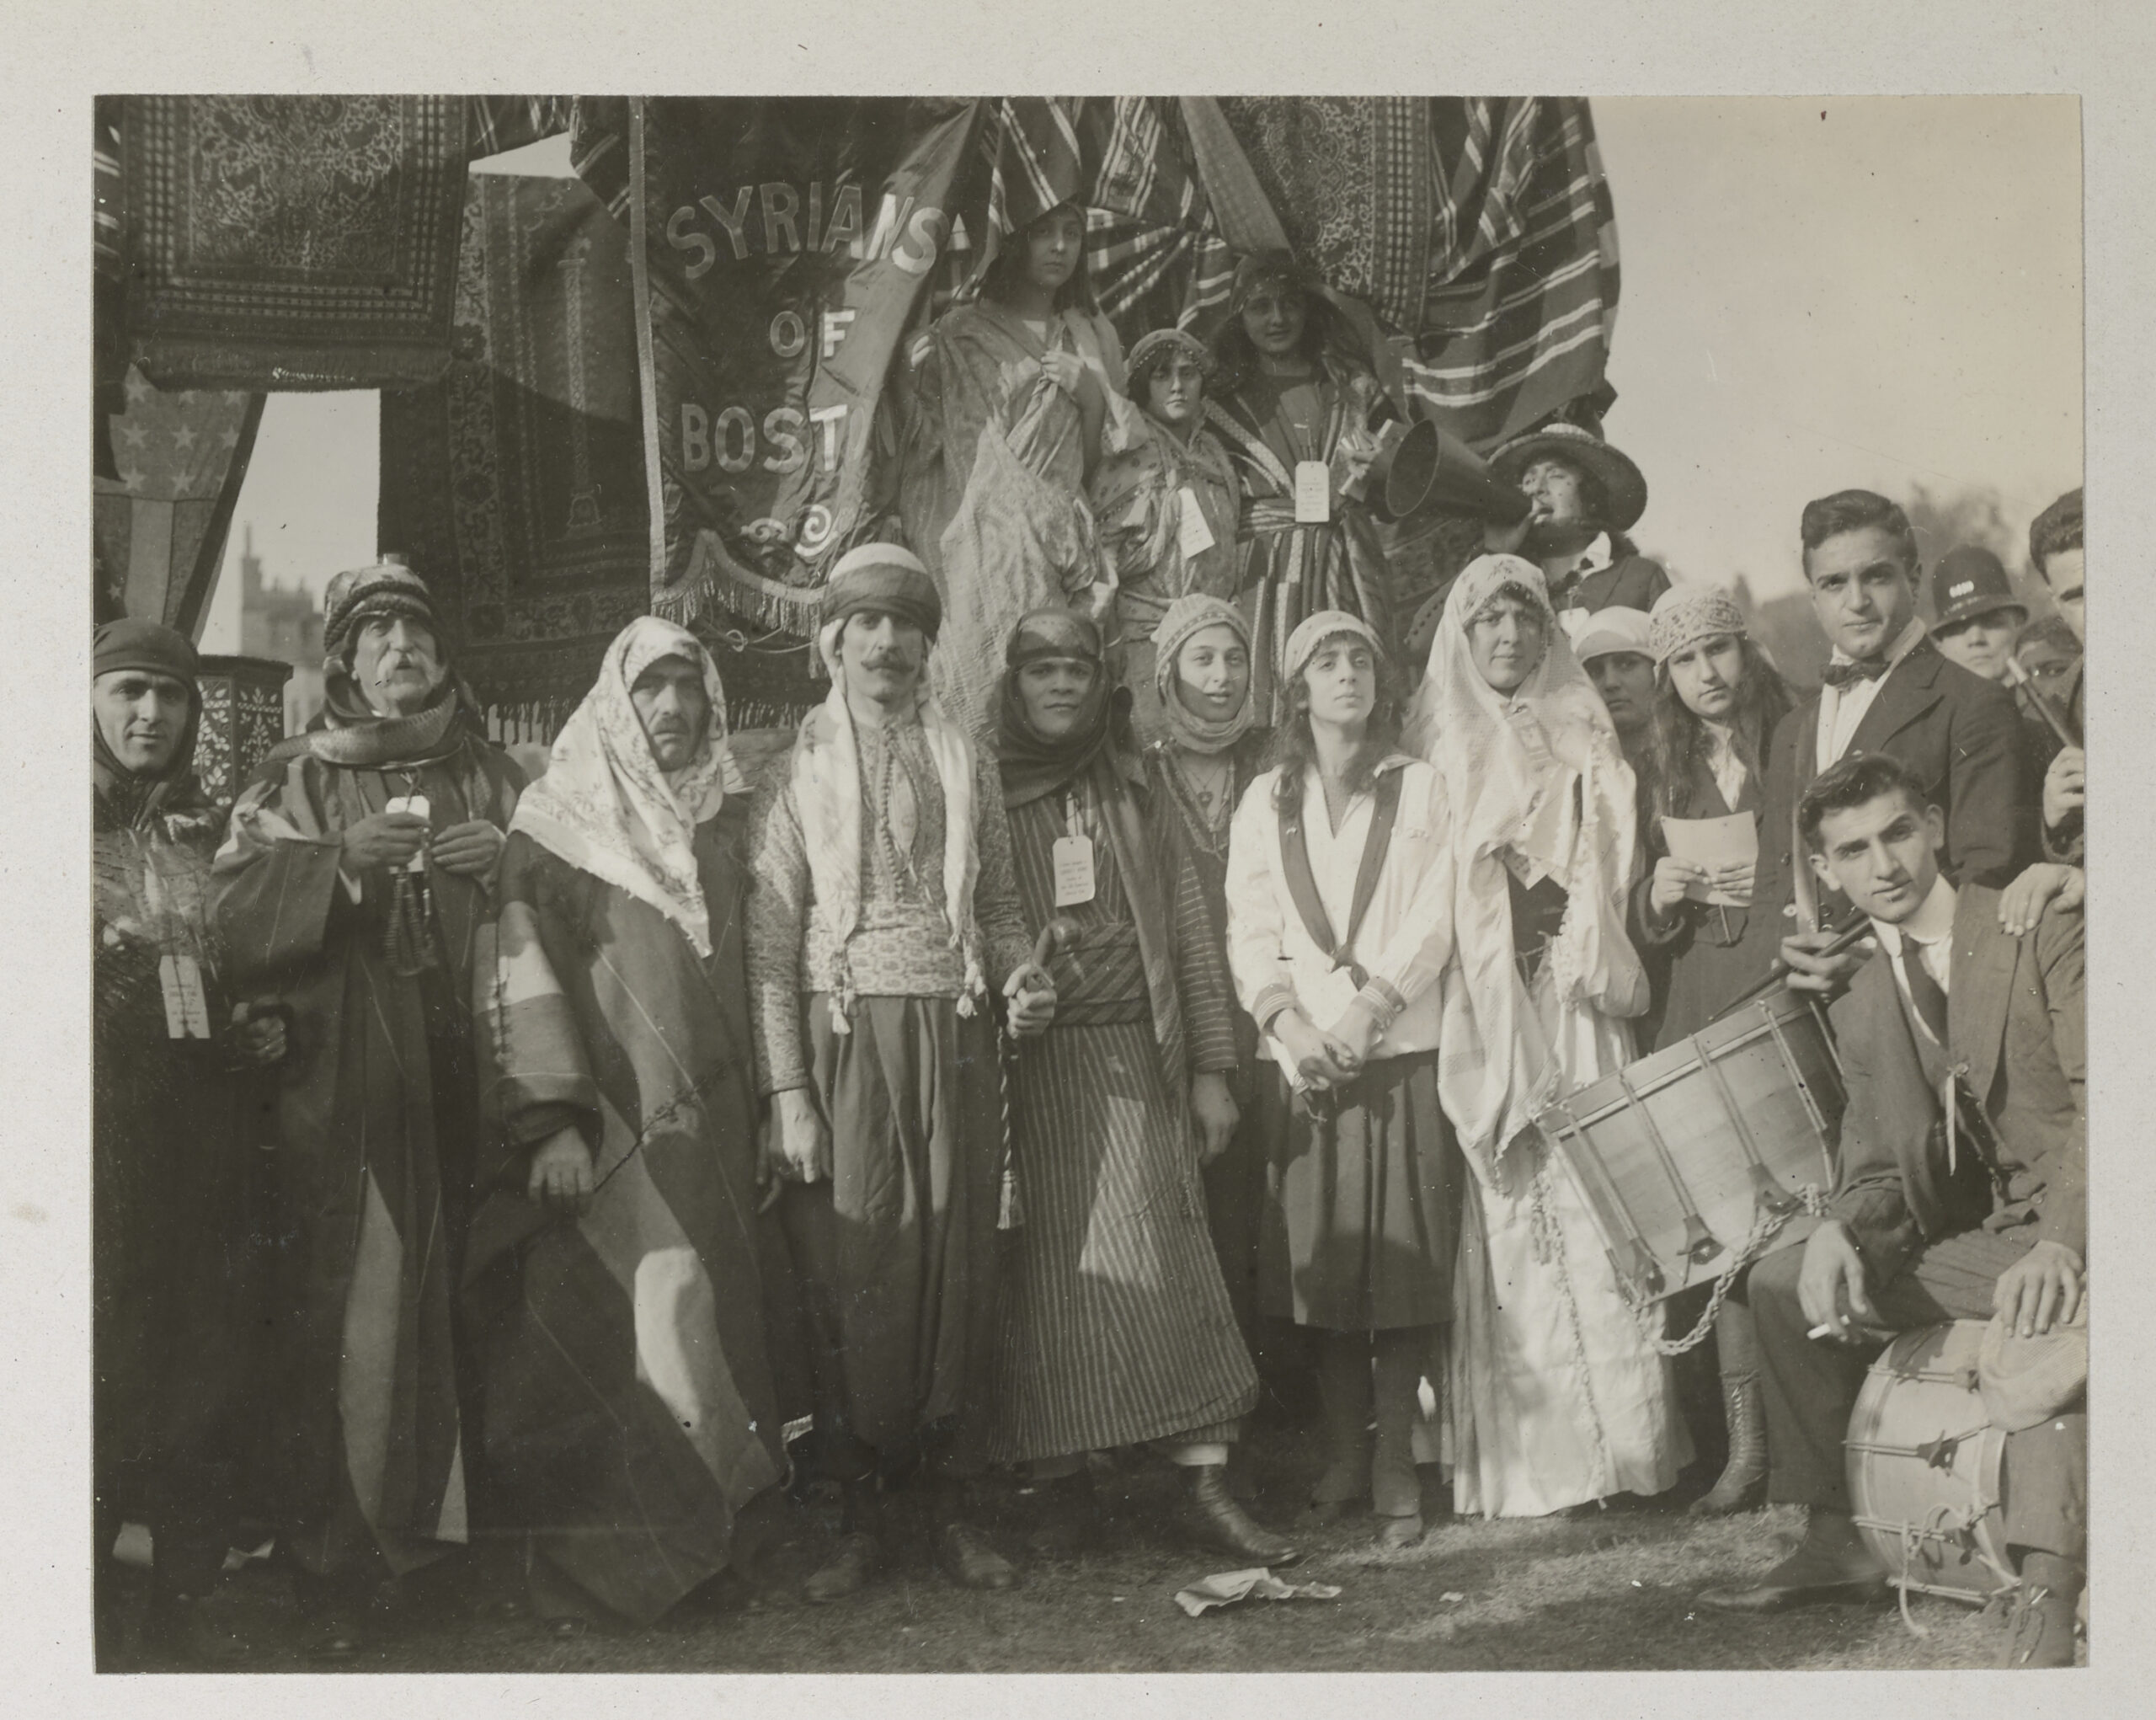 Black-and-white image of a group of Syrians in traditional dress gathered on Boston Common in front of a sign that reads "Syrians of Boston."